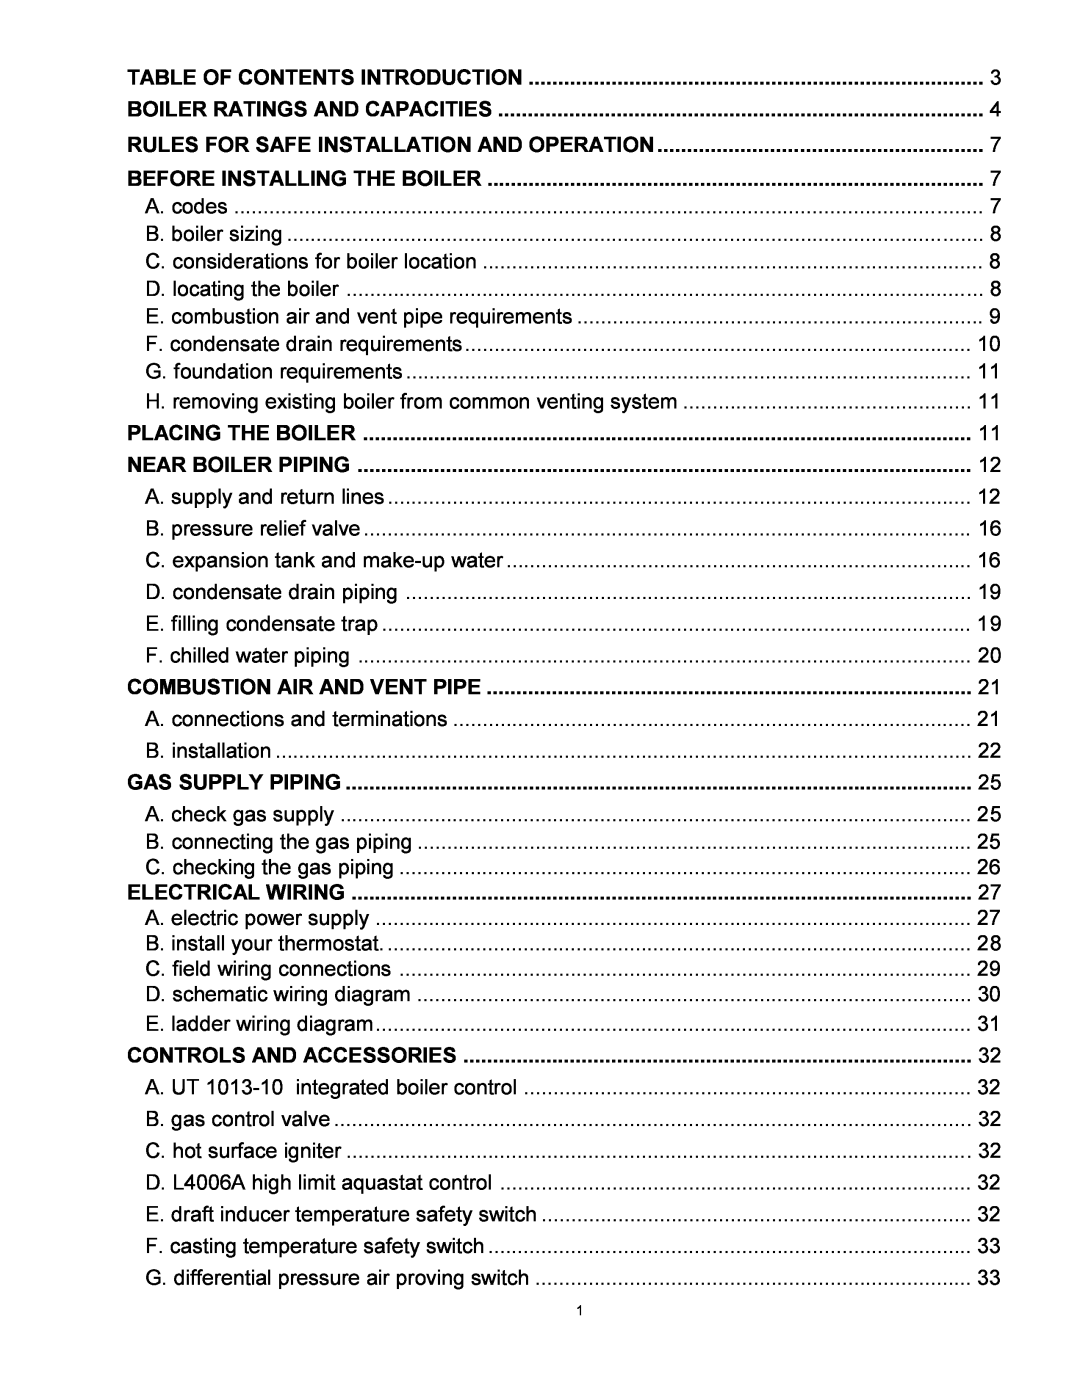 Quantum GAS-FIRED BOILERS Table Of Contents Introduction, Boiler Ratings And Capacities, Before Installing The Boiler 